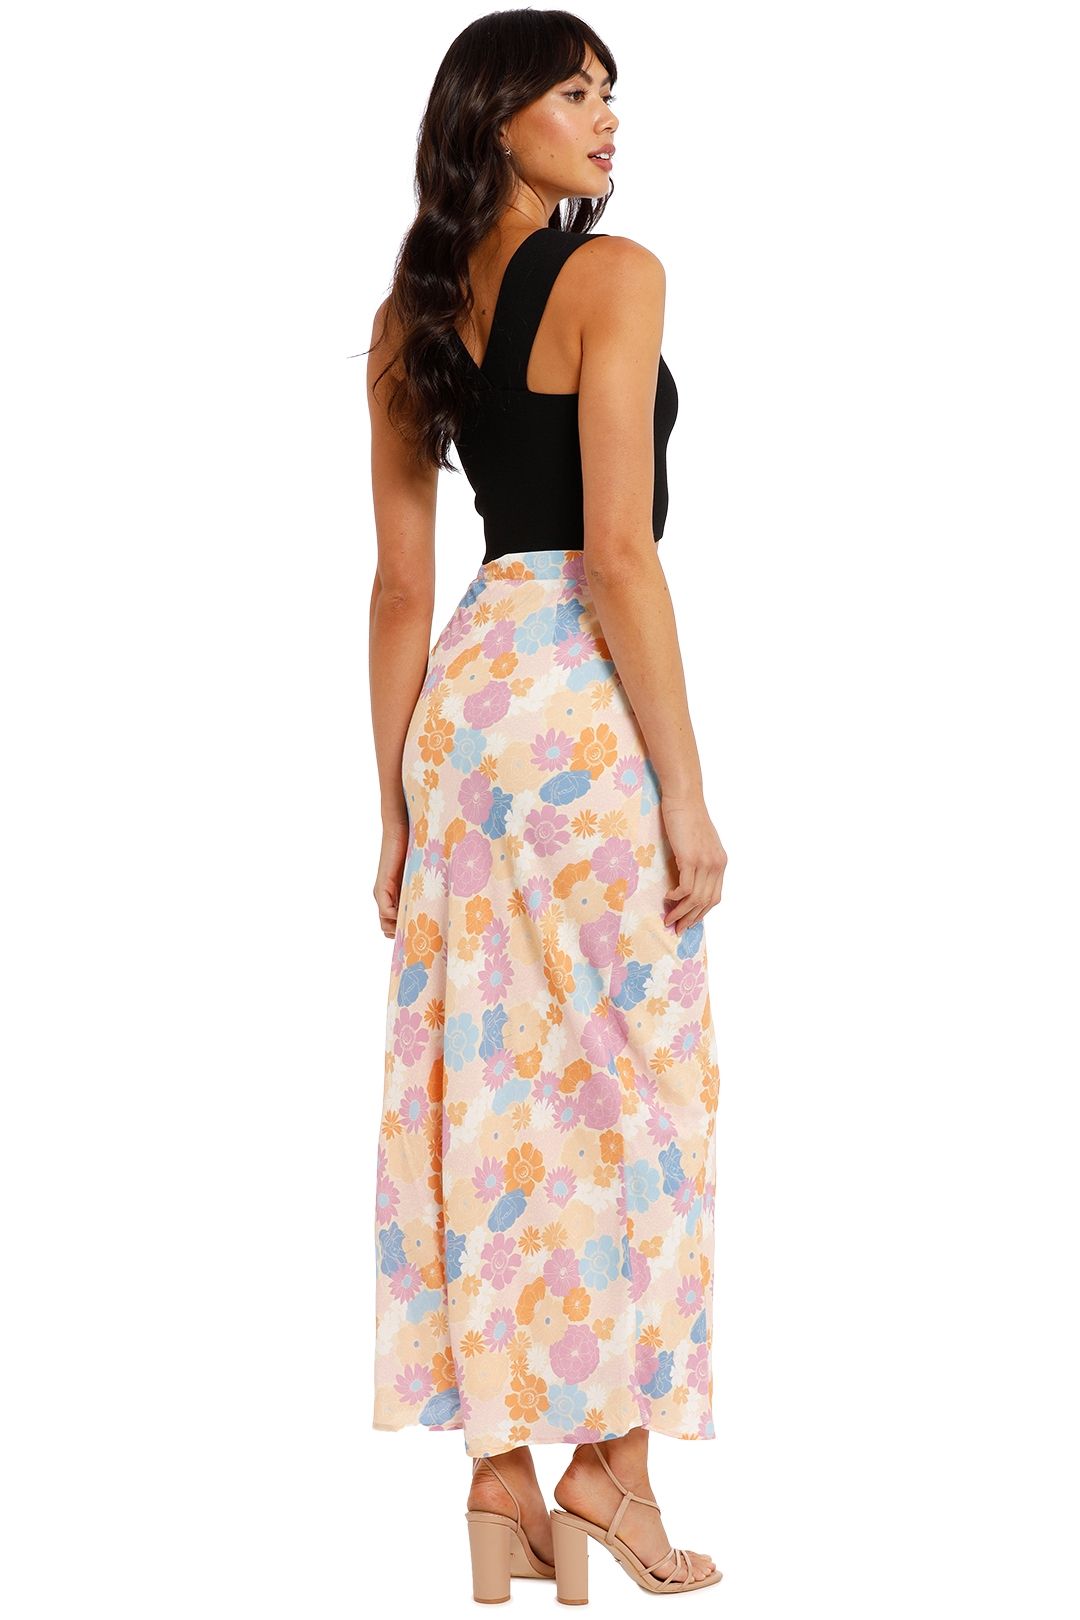 Charlie Holiday Emily Skirt Floral Cove Pastel